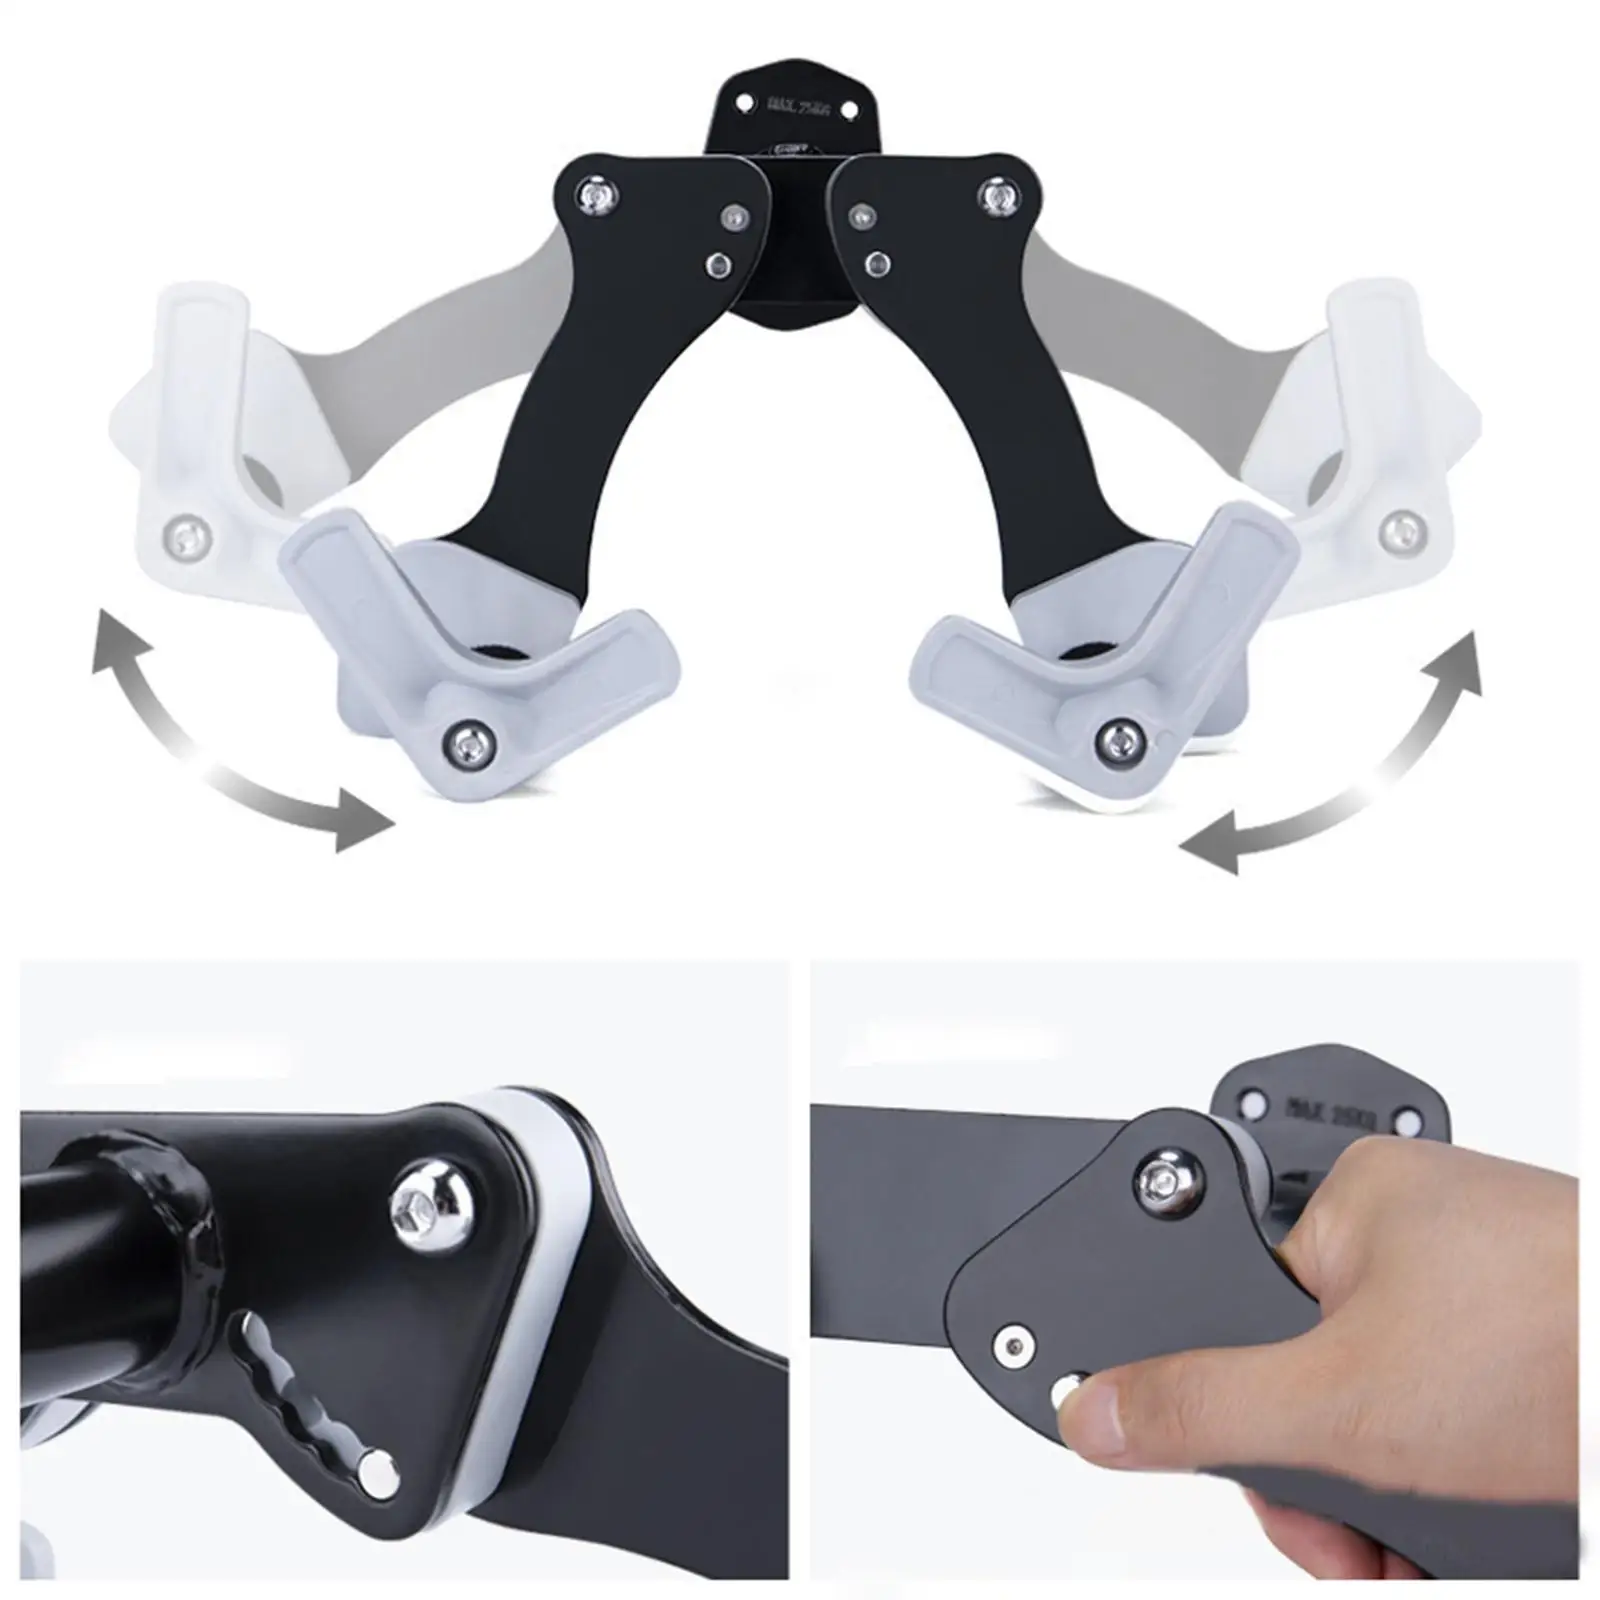 Folding Bicycle Rack Wall Hanger Adjustable Cycling Accessory Bicycle Hold Hooks Holder Cycle Wall Mount for Hybrid Bikes Home